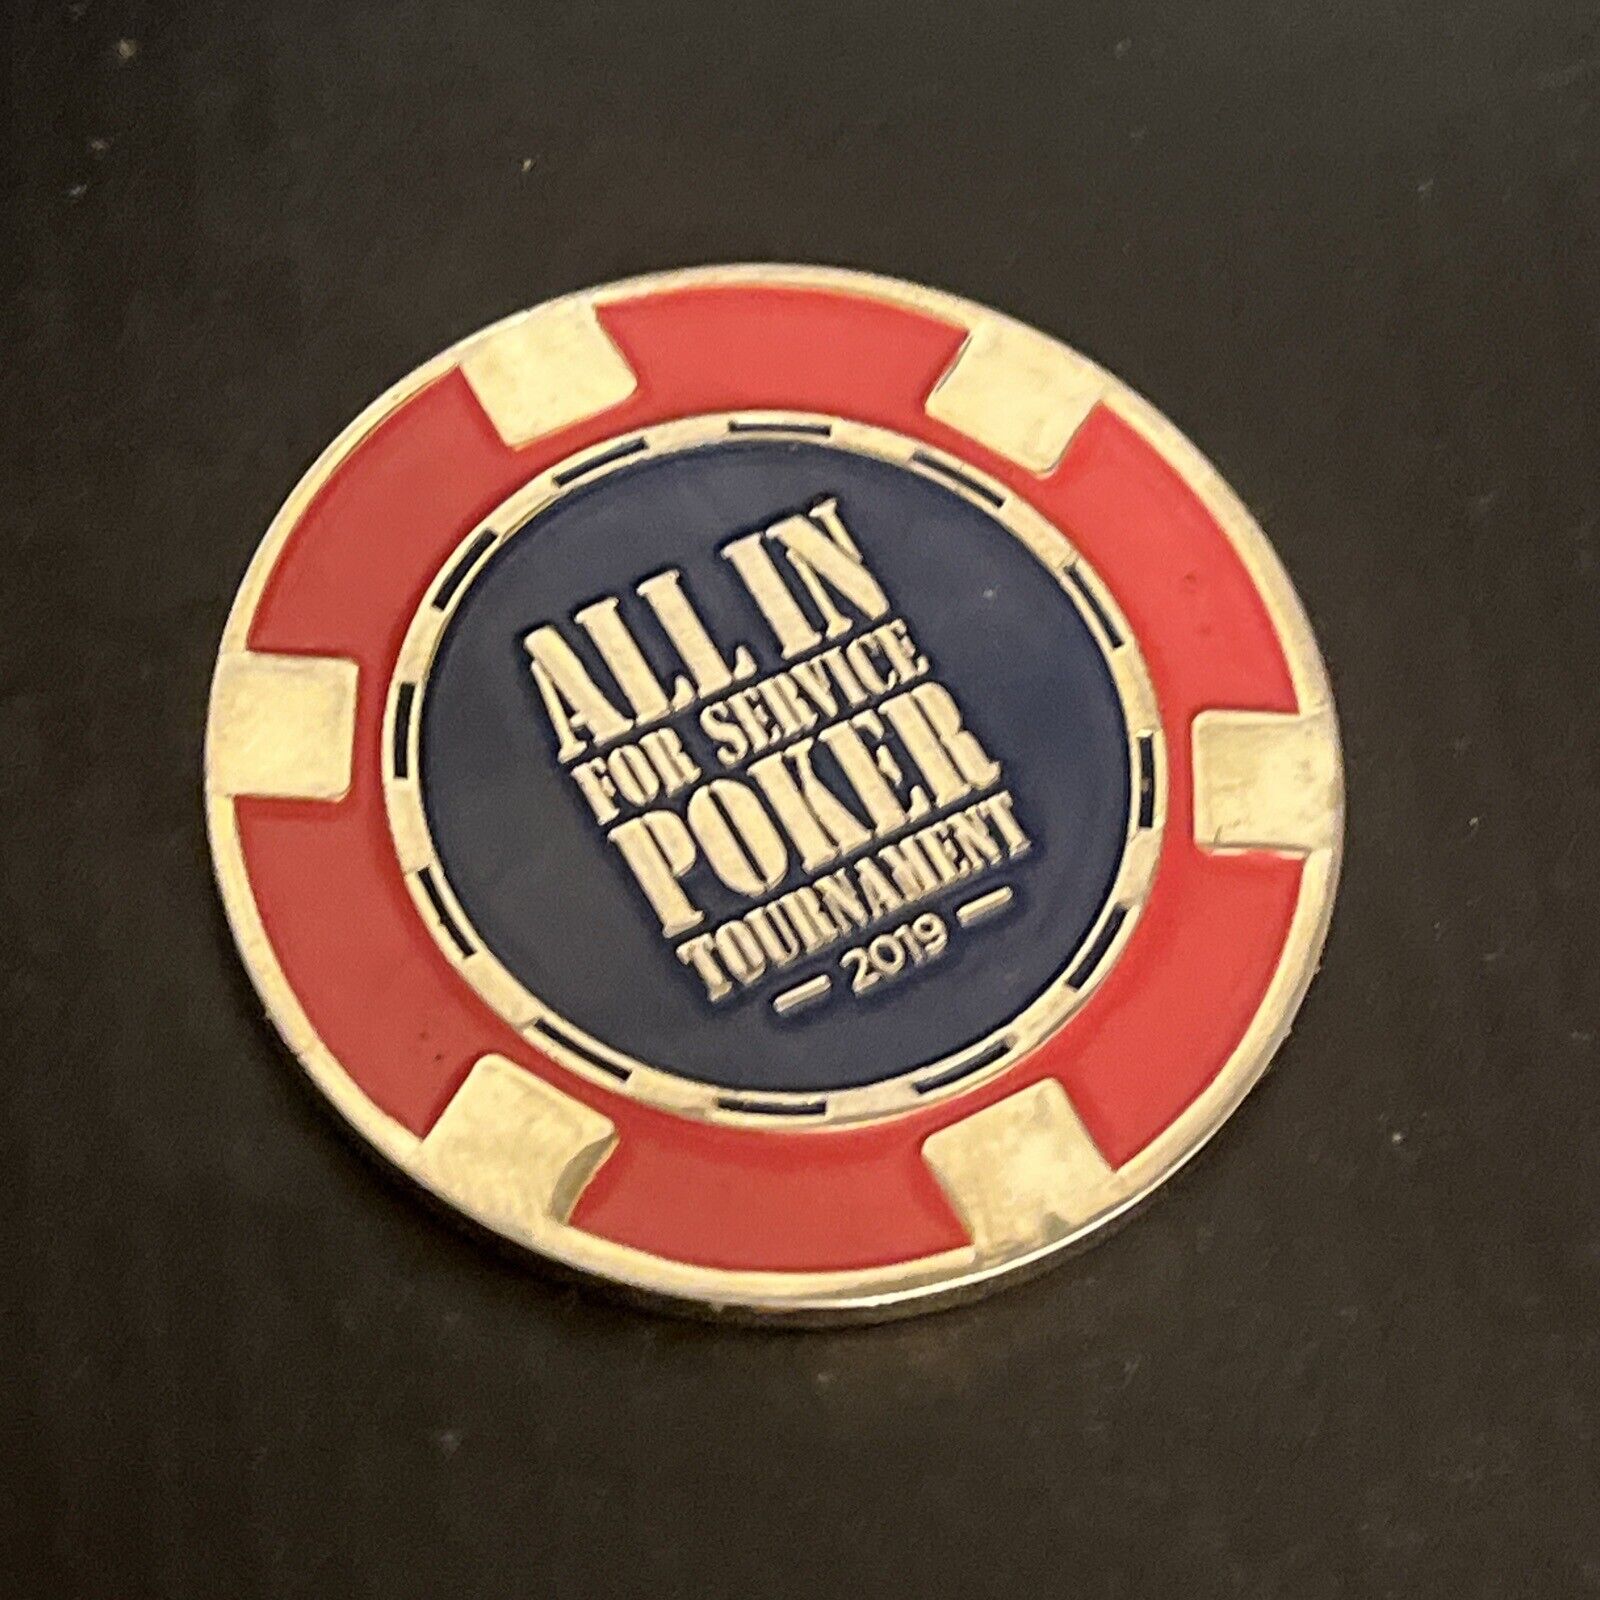 MGM Resorts “all In For Service Poker Tournament 2019” Poker Chip